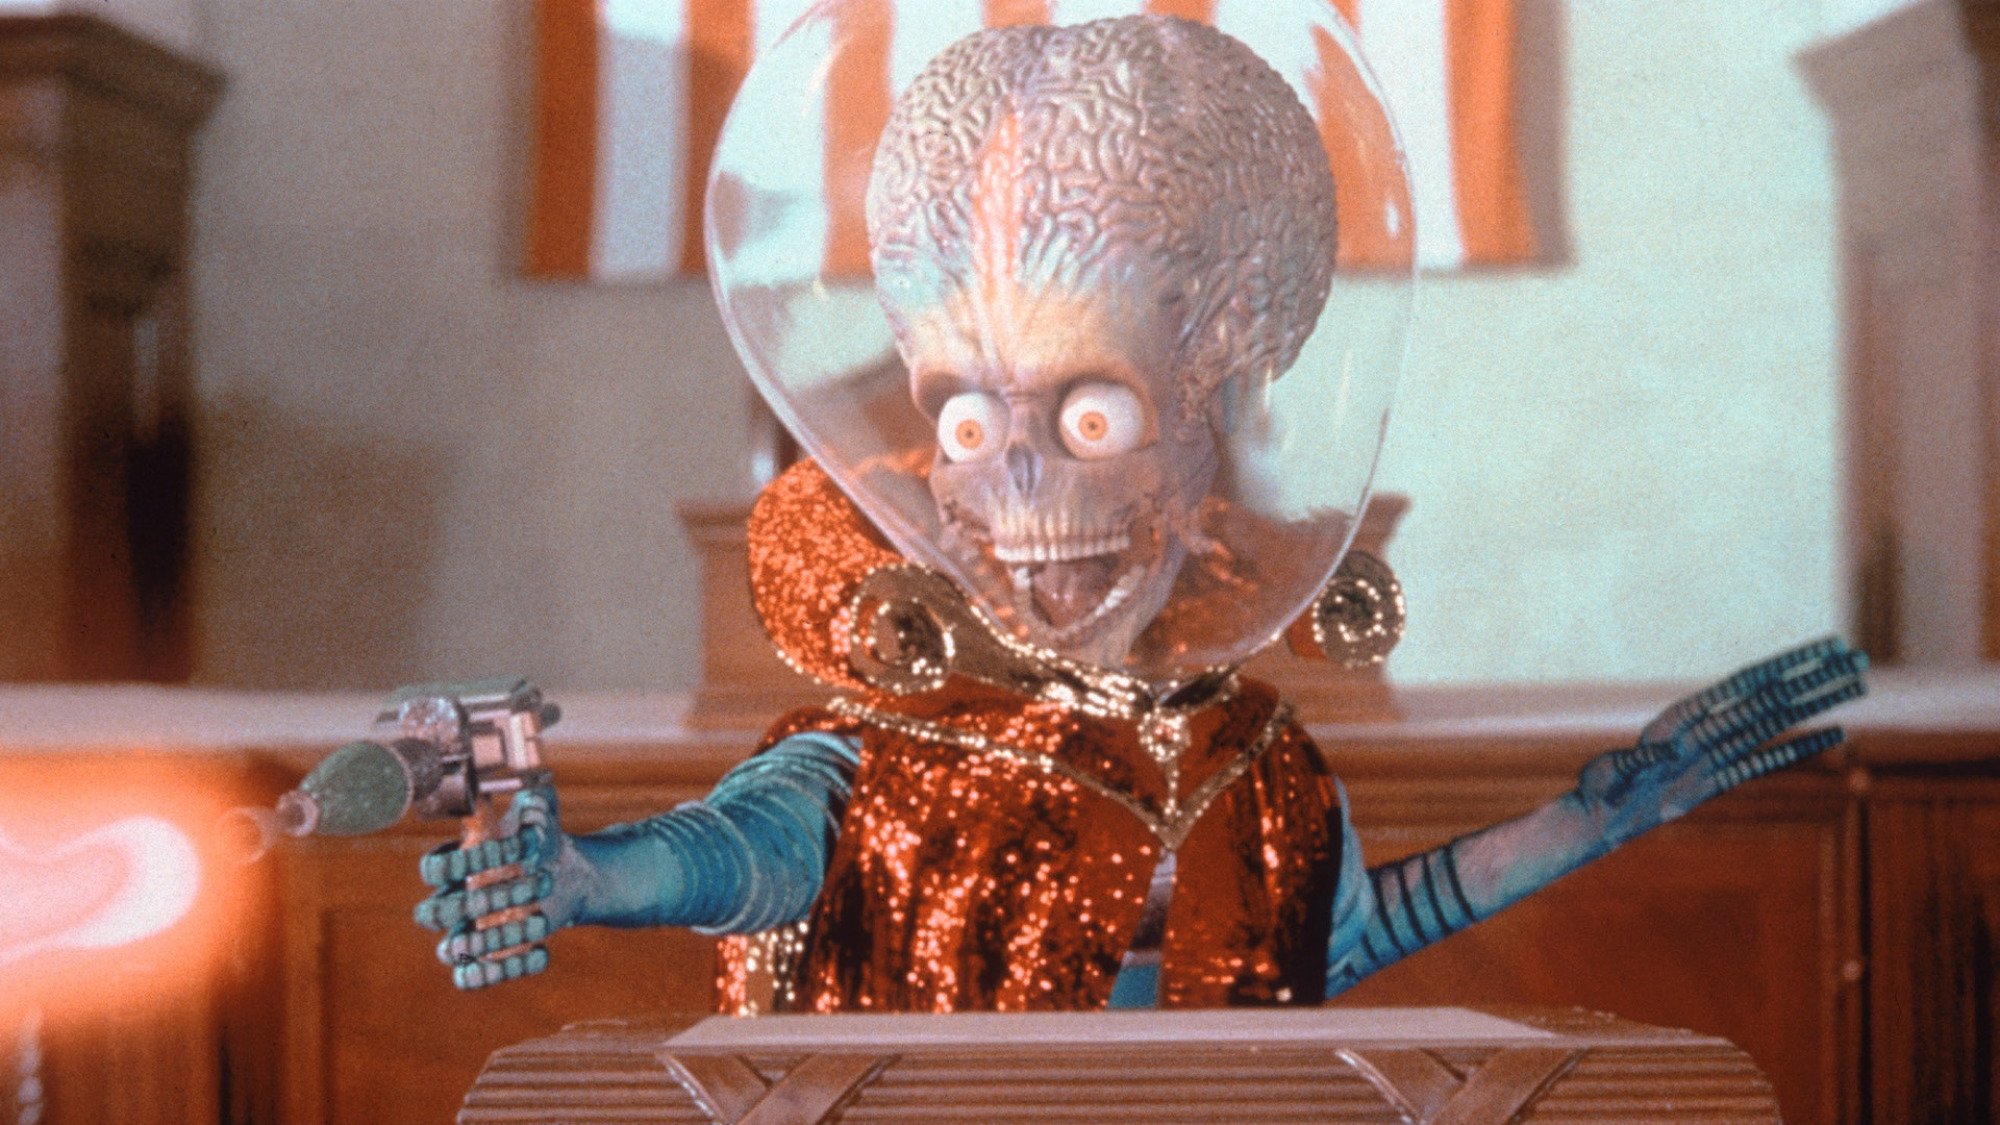 An alien with a blaster in the movie "Mars Attacks!"